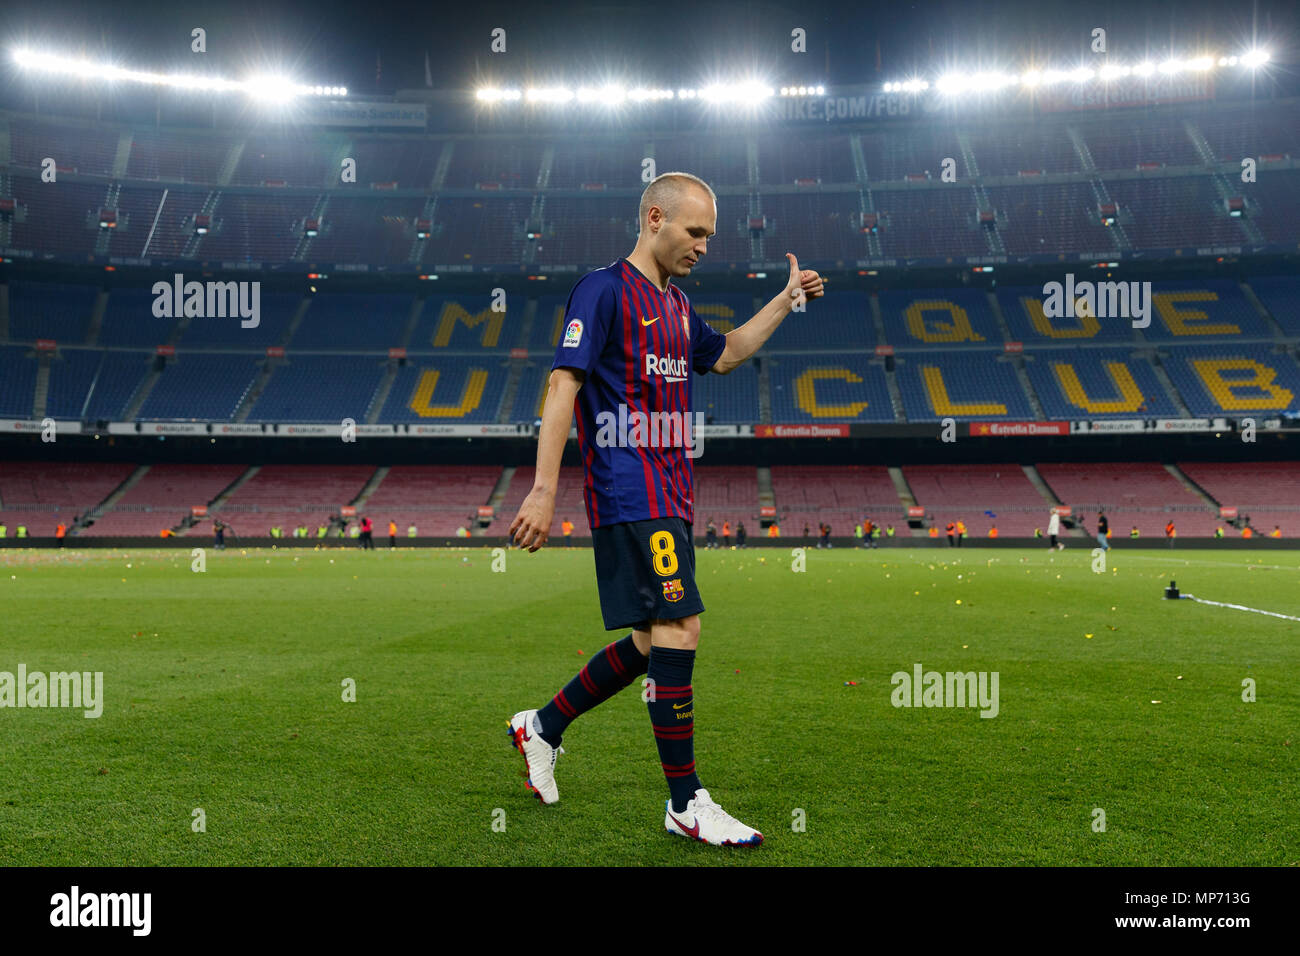 Barcelona, 20th May: Andres Iniesta of FC Barcelona during the celebration  of the two titles won in the season 2017/2018. Credit: UKKO Images/Alamy  Live News Stock Photo - Alamy